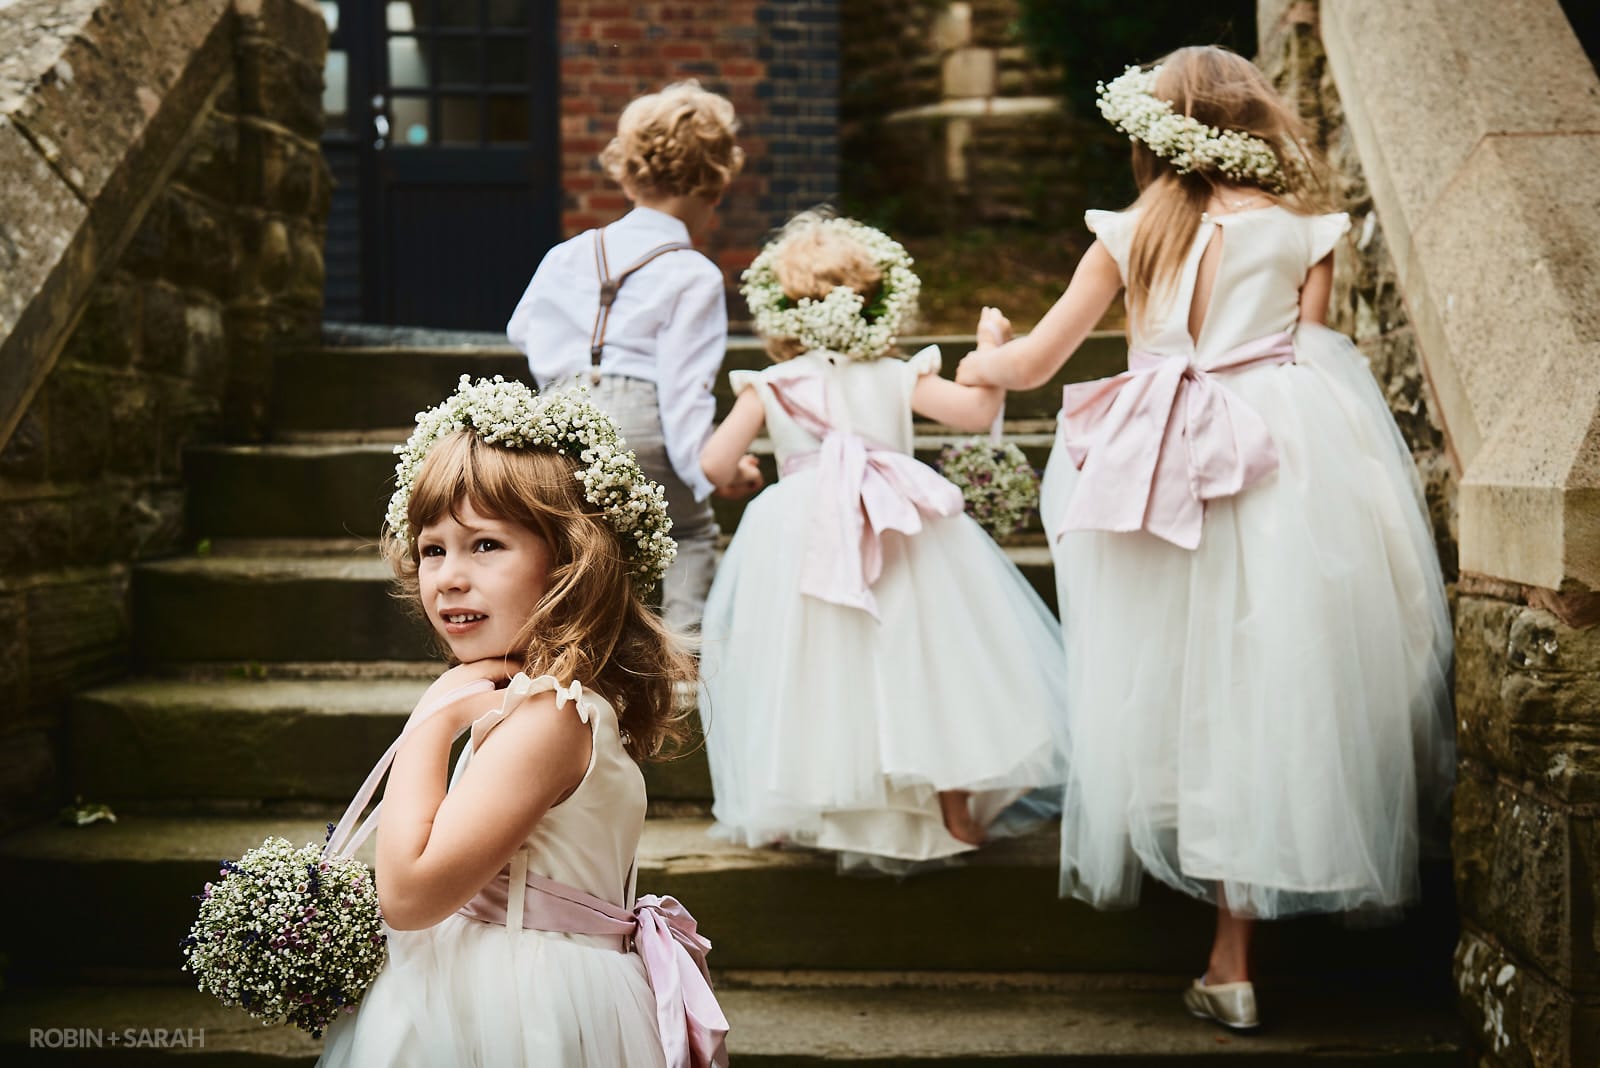 Flowergirl turns as she arrives at wedding ceremony